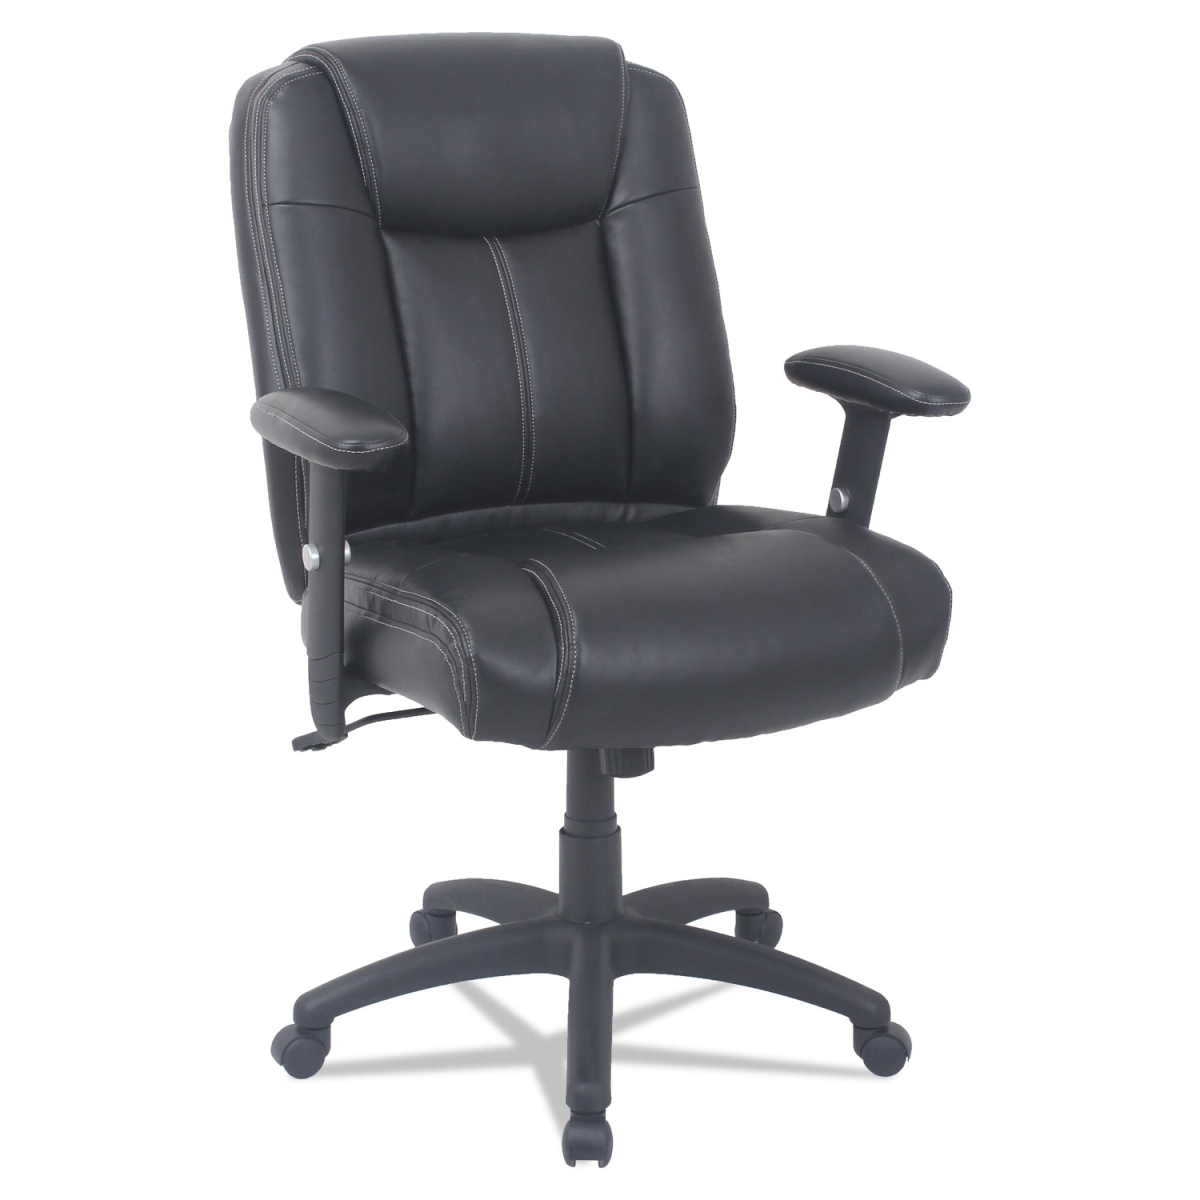 Alera Alecc4219 Leather Mid-back Chair With Adjustable Arms, Black